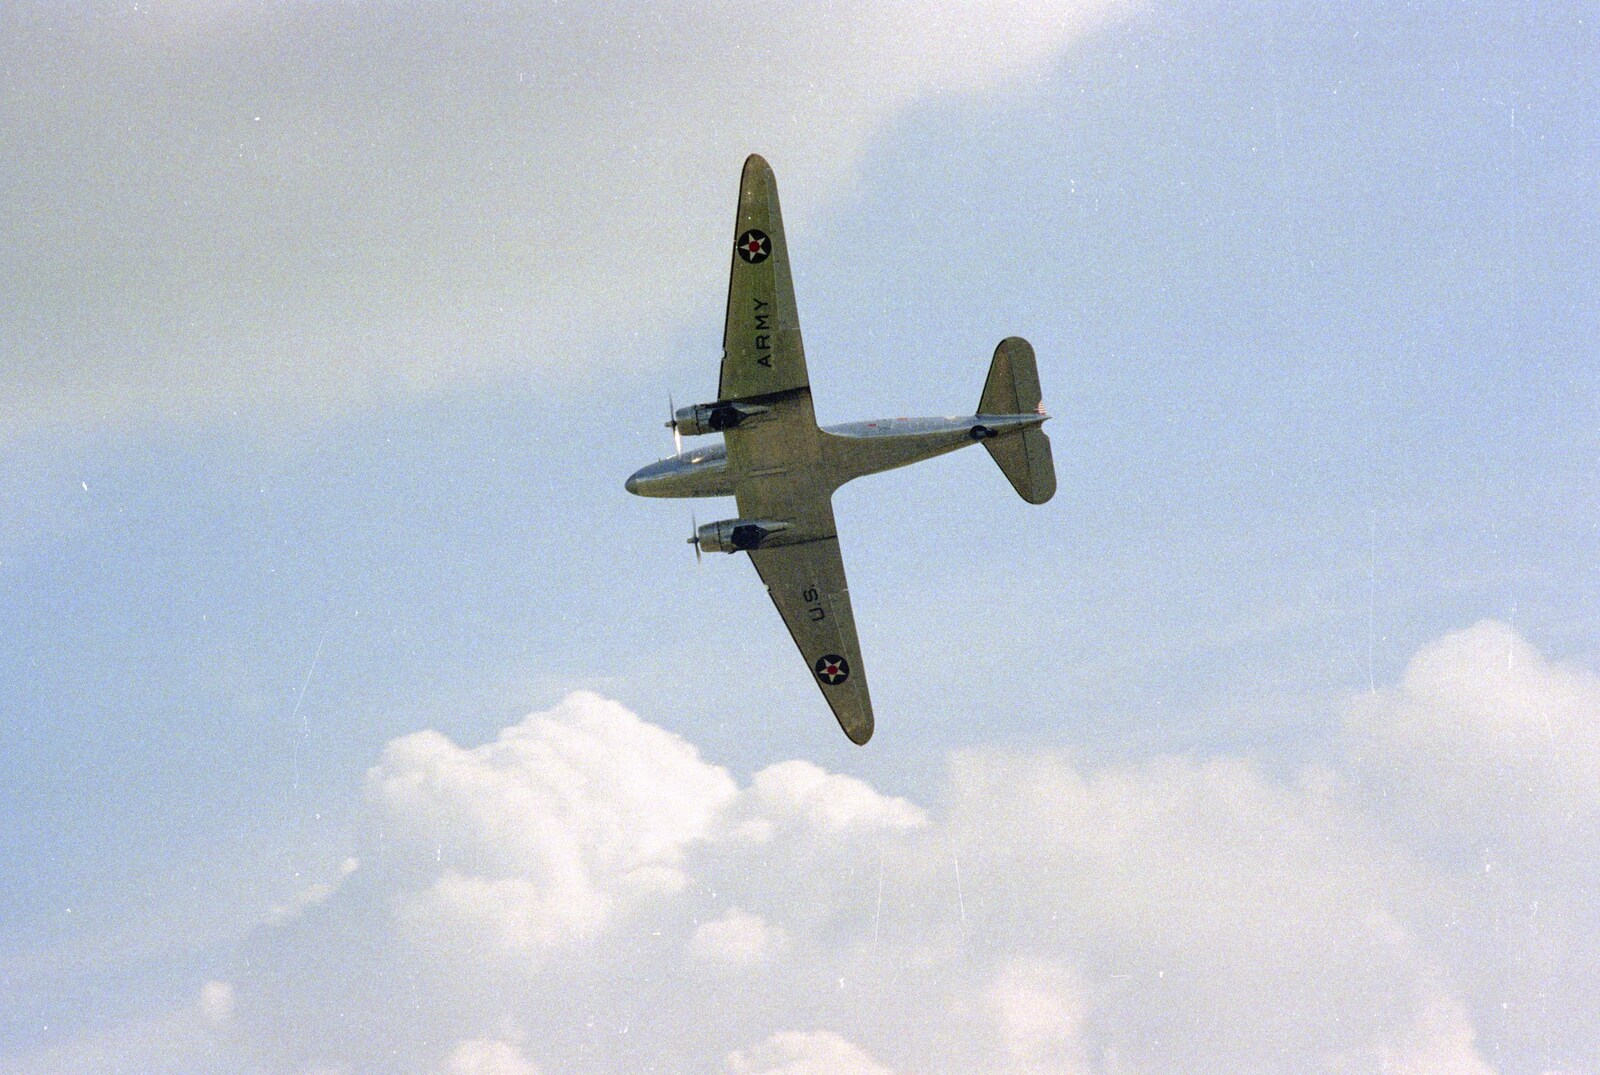 The C-47 Skytrain flies over from The Mildenhall Air Fete, Mildenhall, Suffolk - 29th May 1994